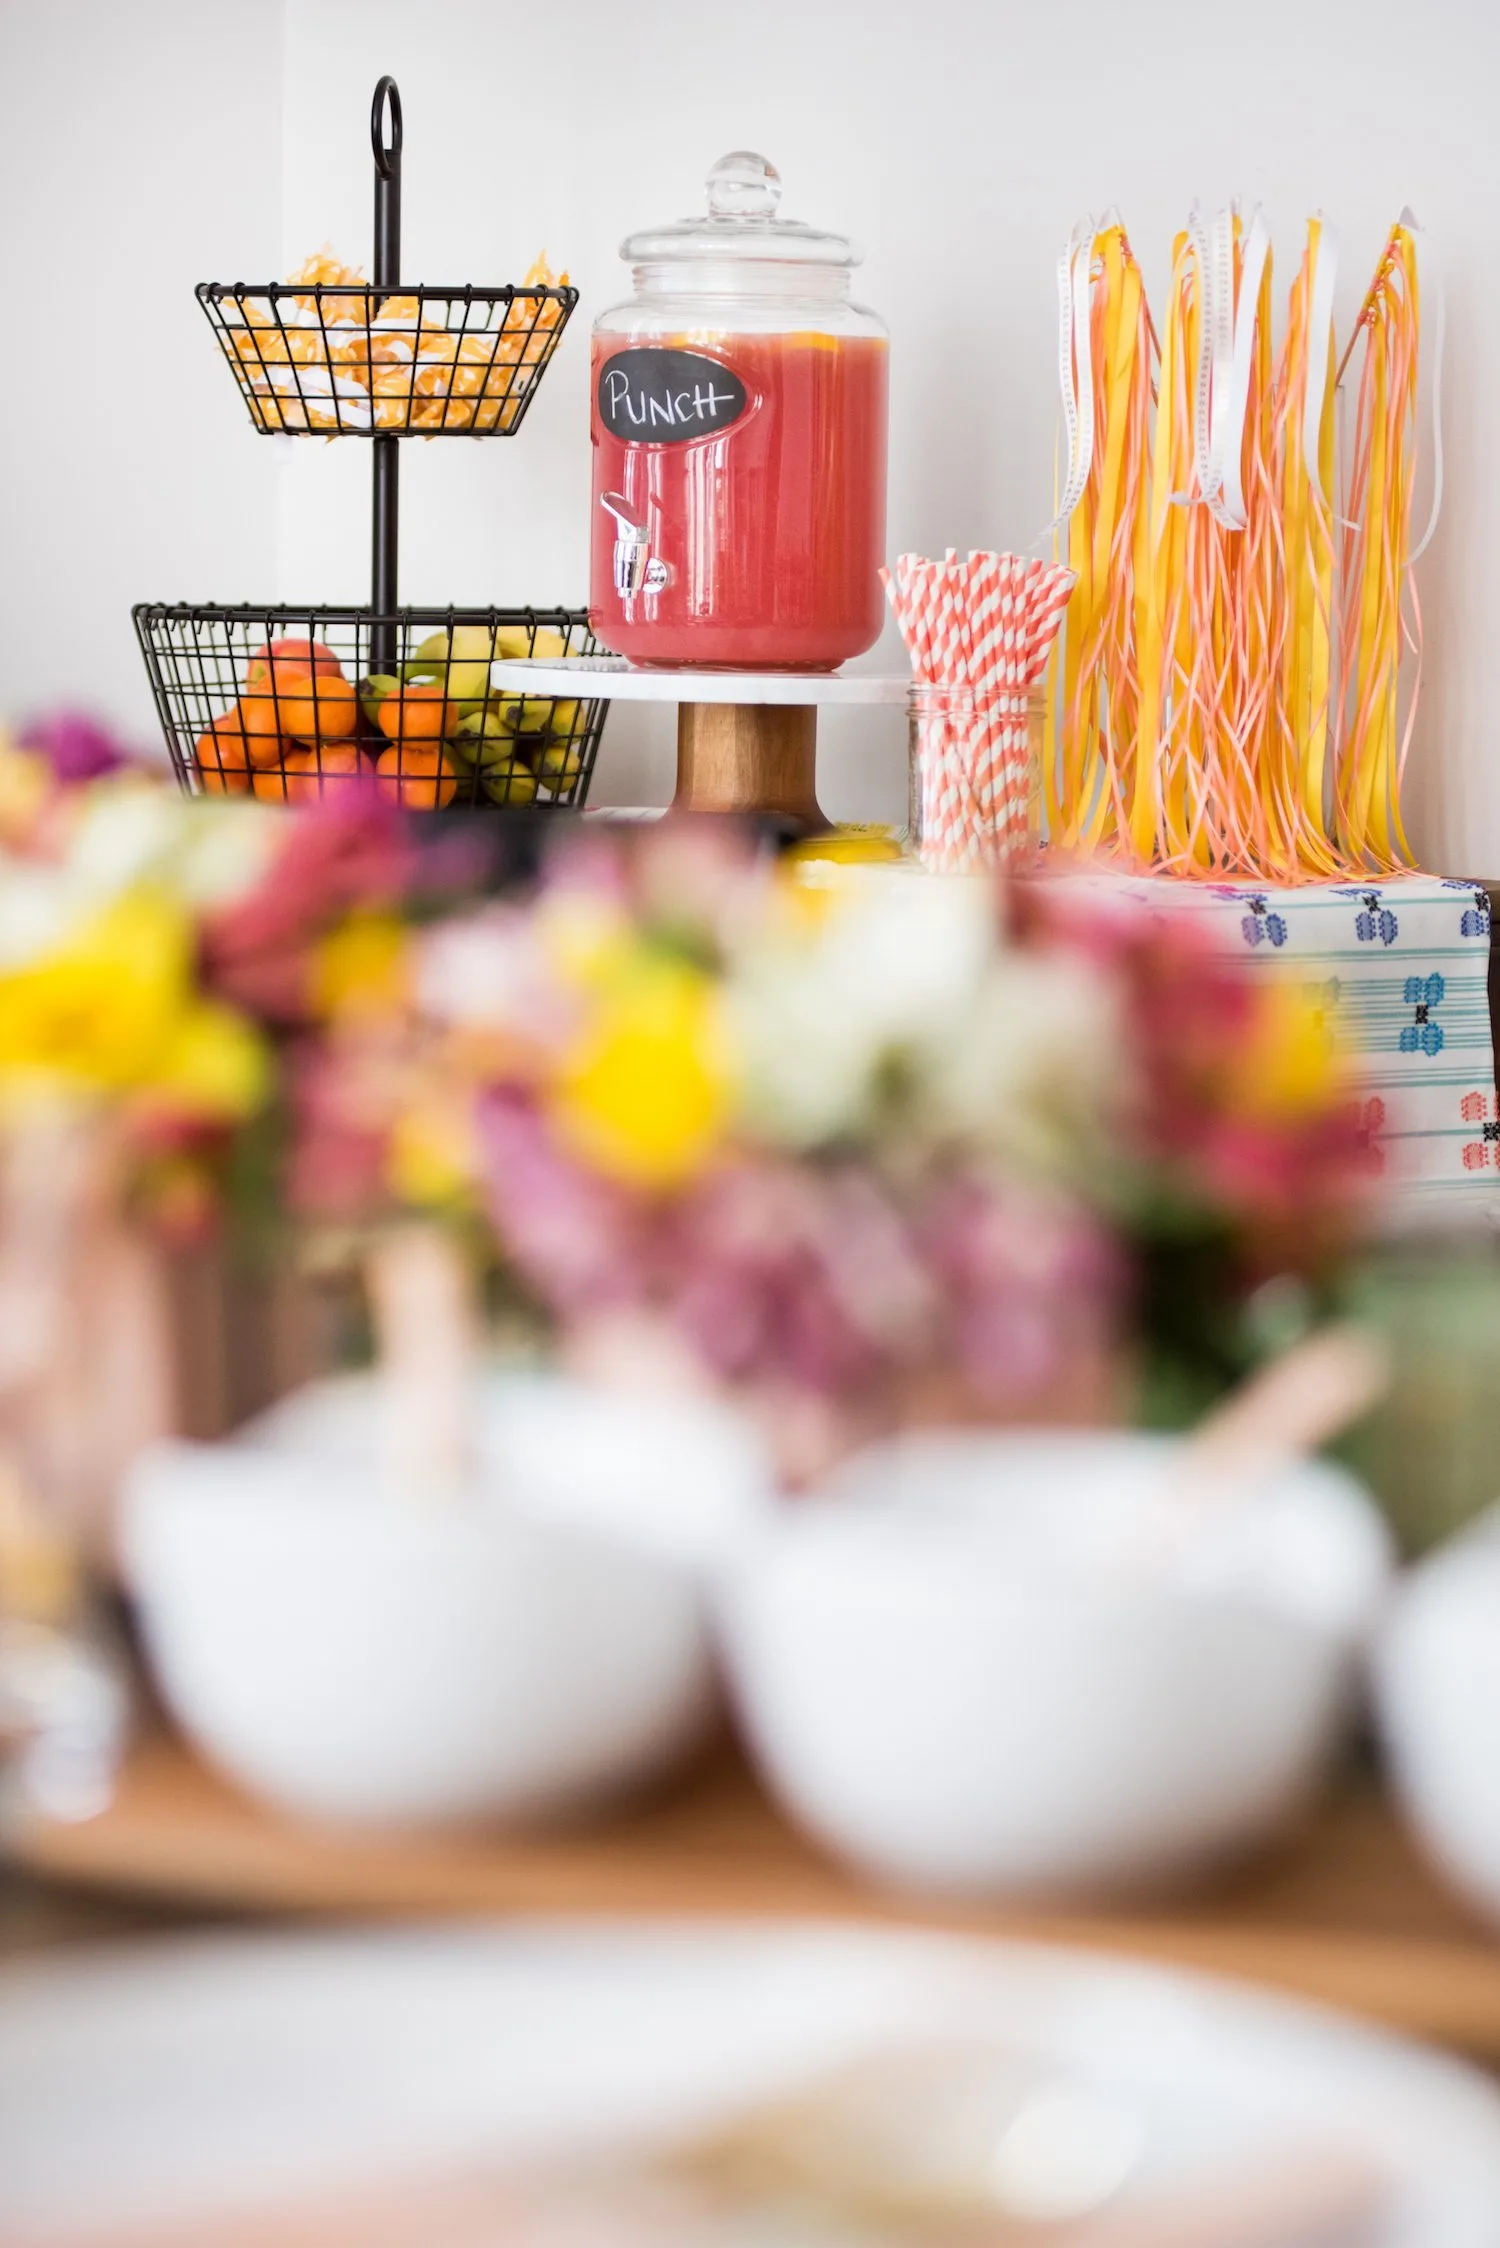 Click through for details on creating a perfectly festive and fresh spring brunch table! Perfect for Easter, Mother's Day, bridal showers and more please loads of additional entertaining tips, party ideas, recipes and more from @cydconverse